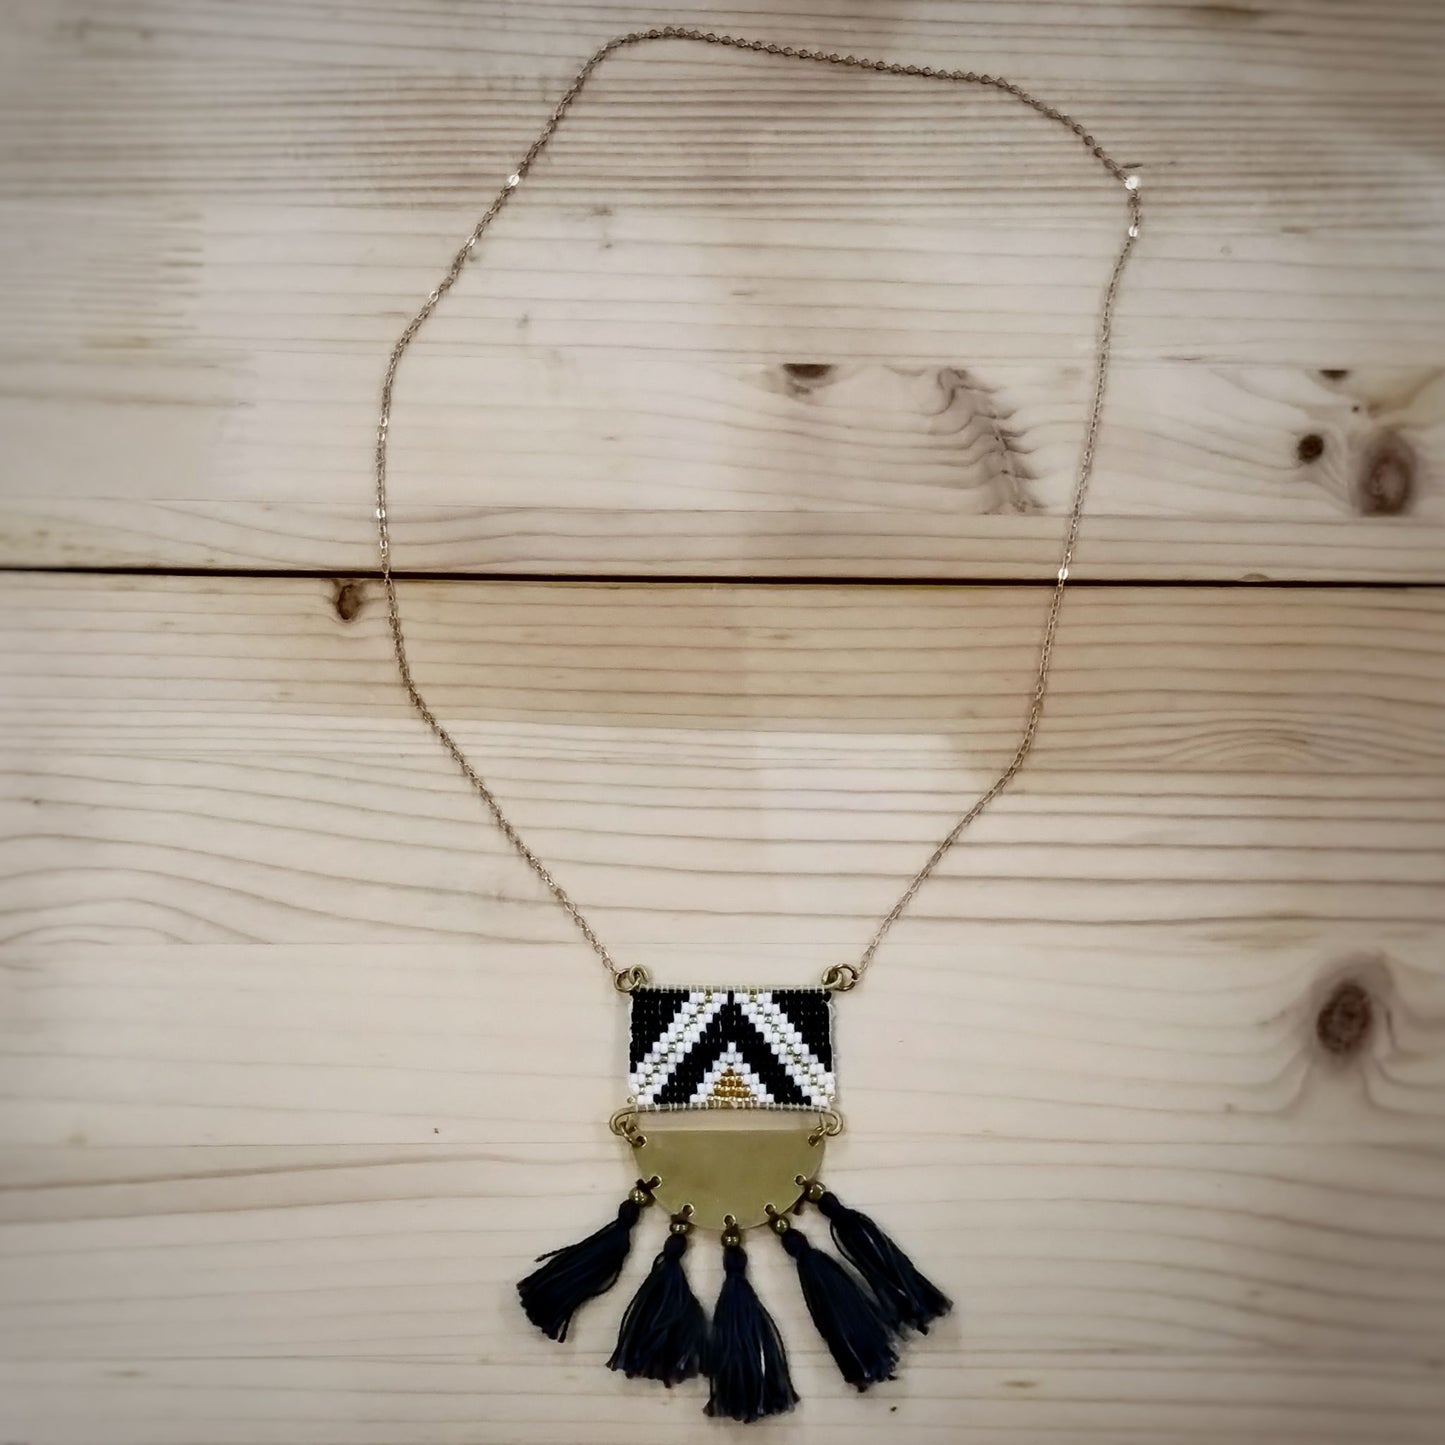 Izazi Black and Gold Beaded Necklace with Fringe - Handmade and Fair Trade